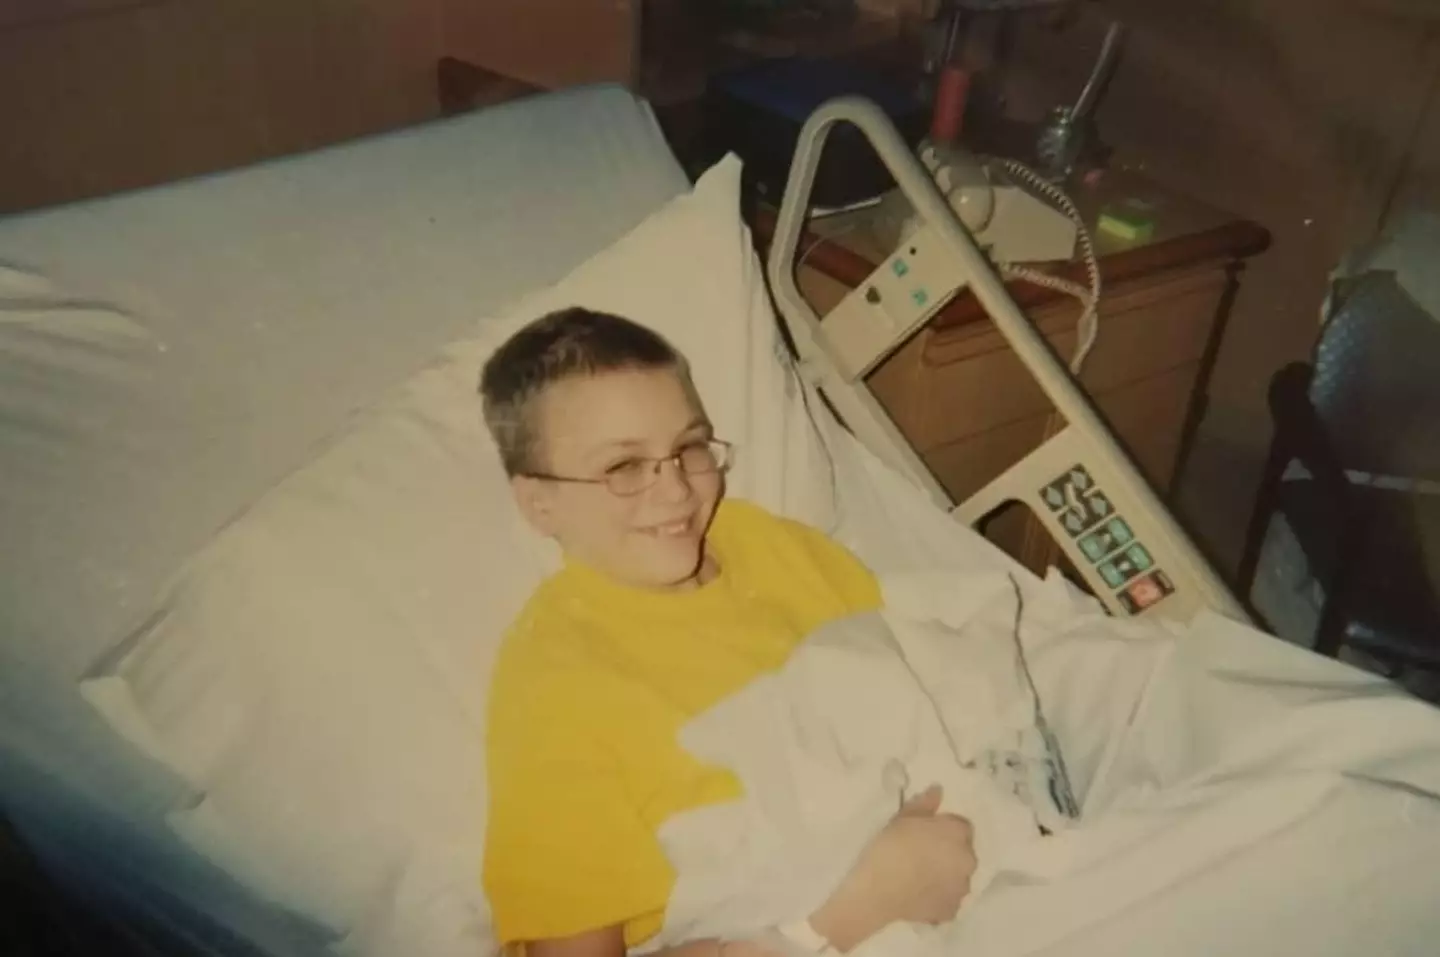 The Redditer was diagnosed with a brain tumour at the age of 12.